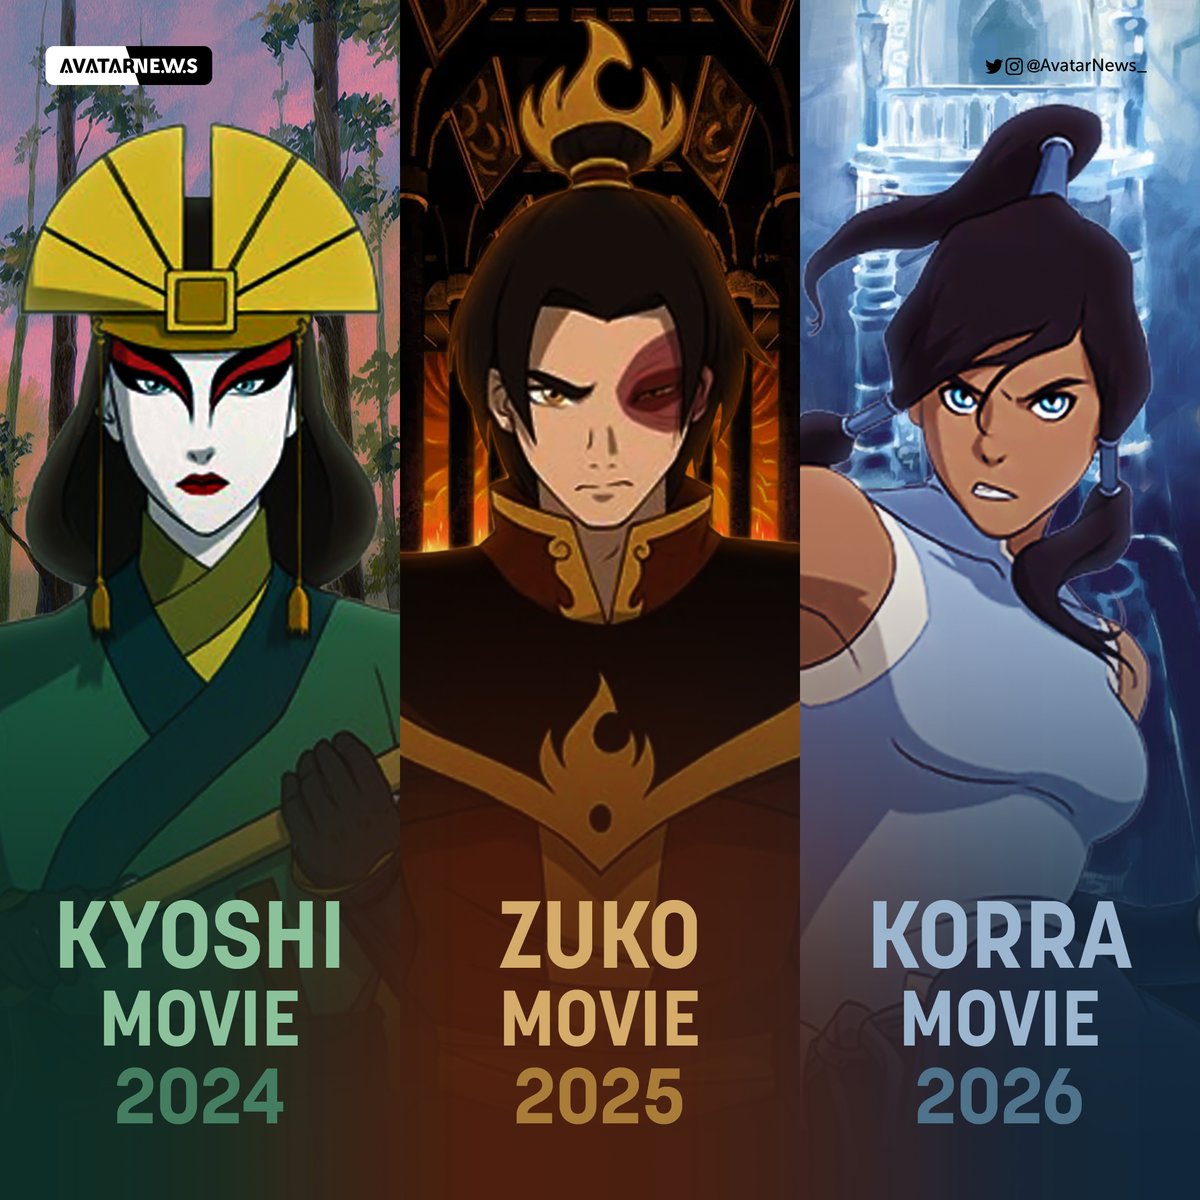 Paramount and Avatar Studios' first three animated Avatar movies coming to theaters:
⛰️ Kyoshi (2024)
🔥 Zuko (2025)
🌊 Korra (2026)

All the info: avatarnews.co/post/687354302…